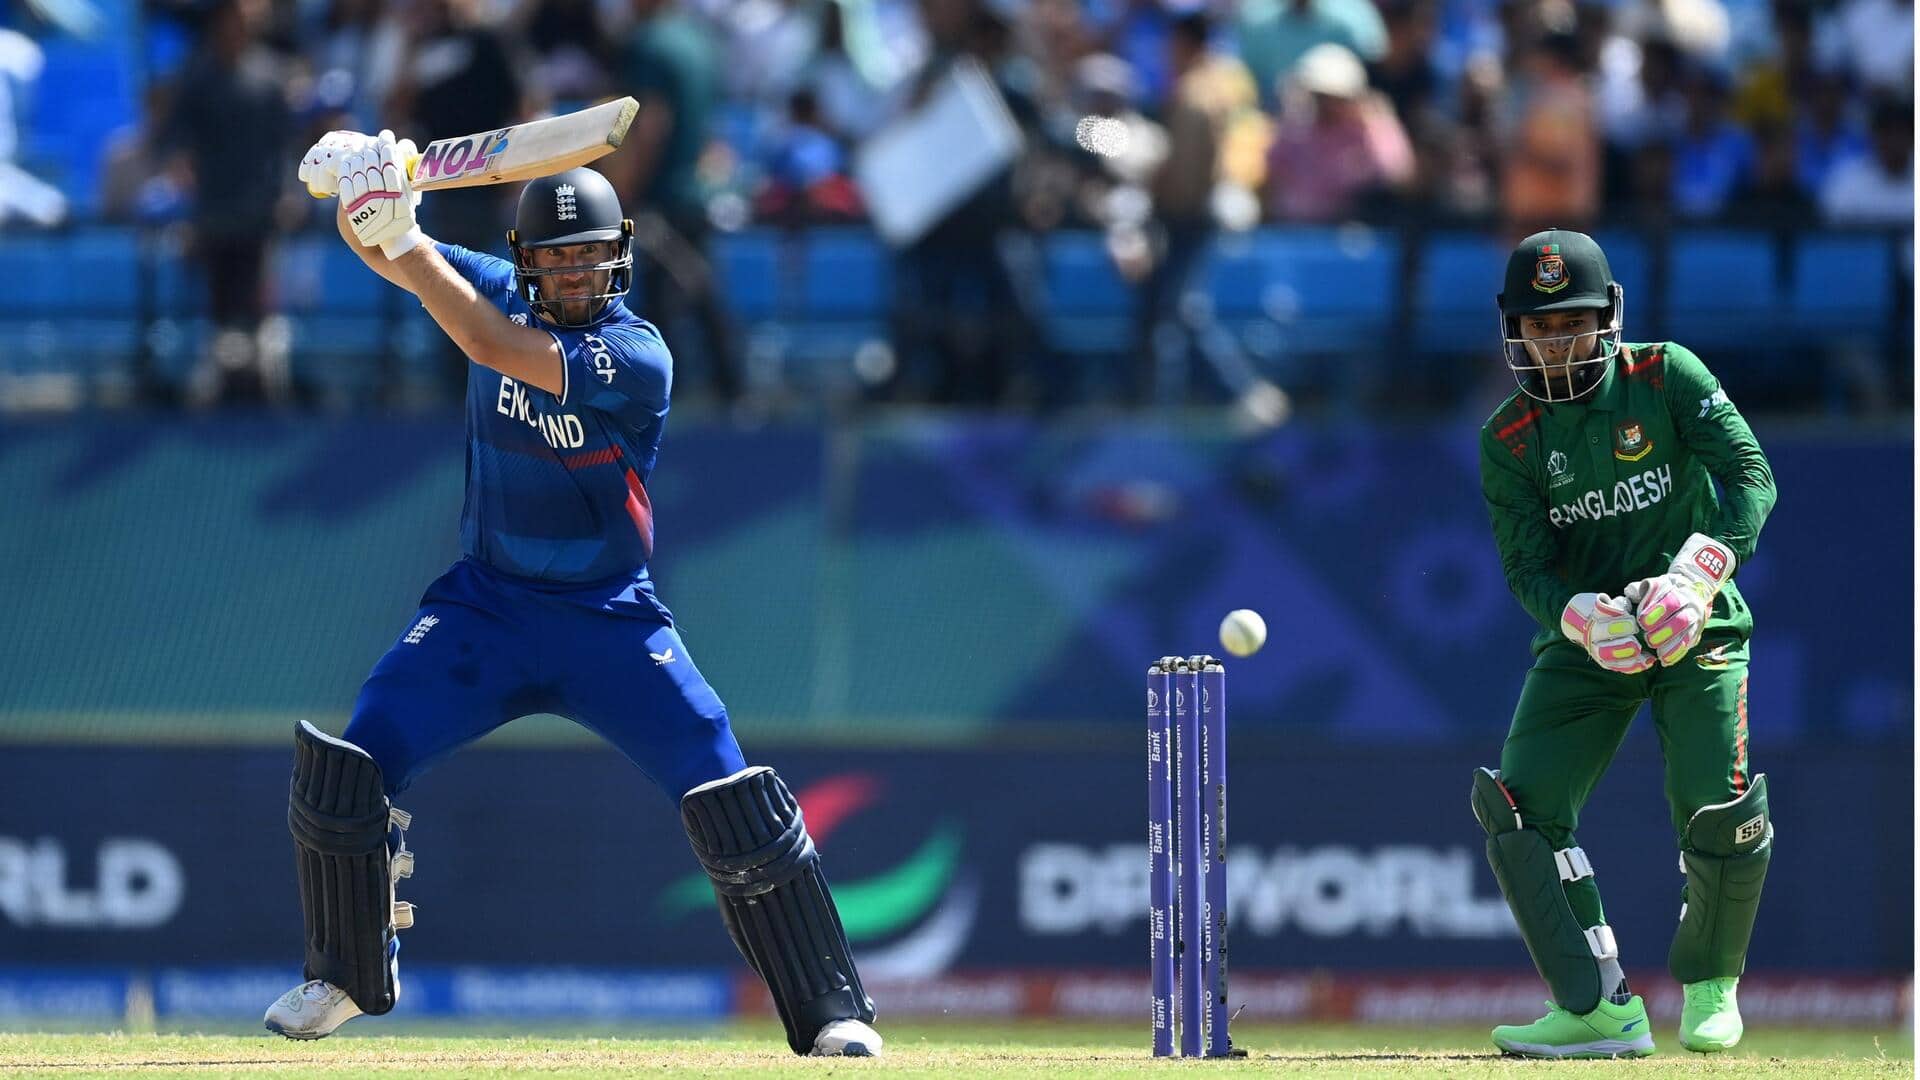 England post their third-highest total in ODI World Cups